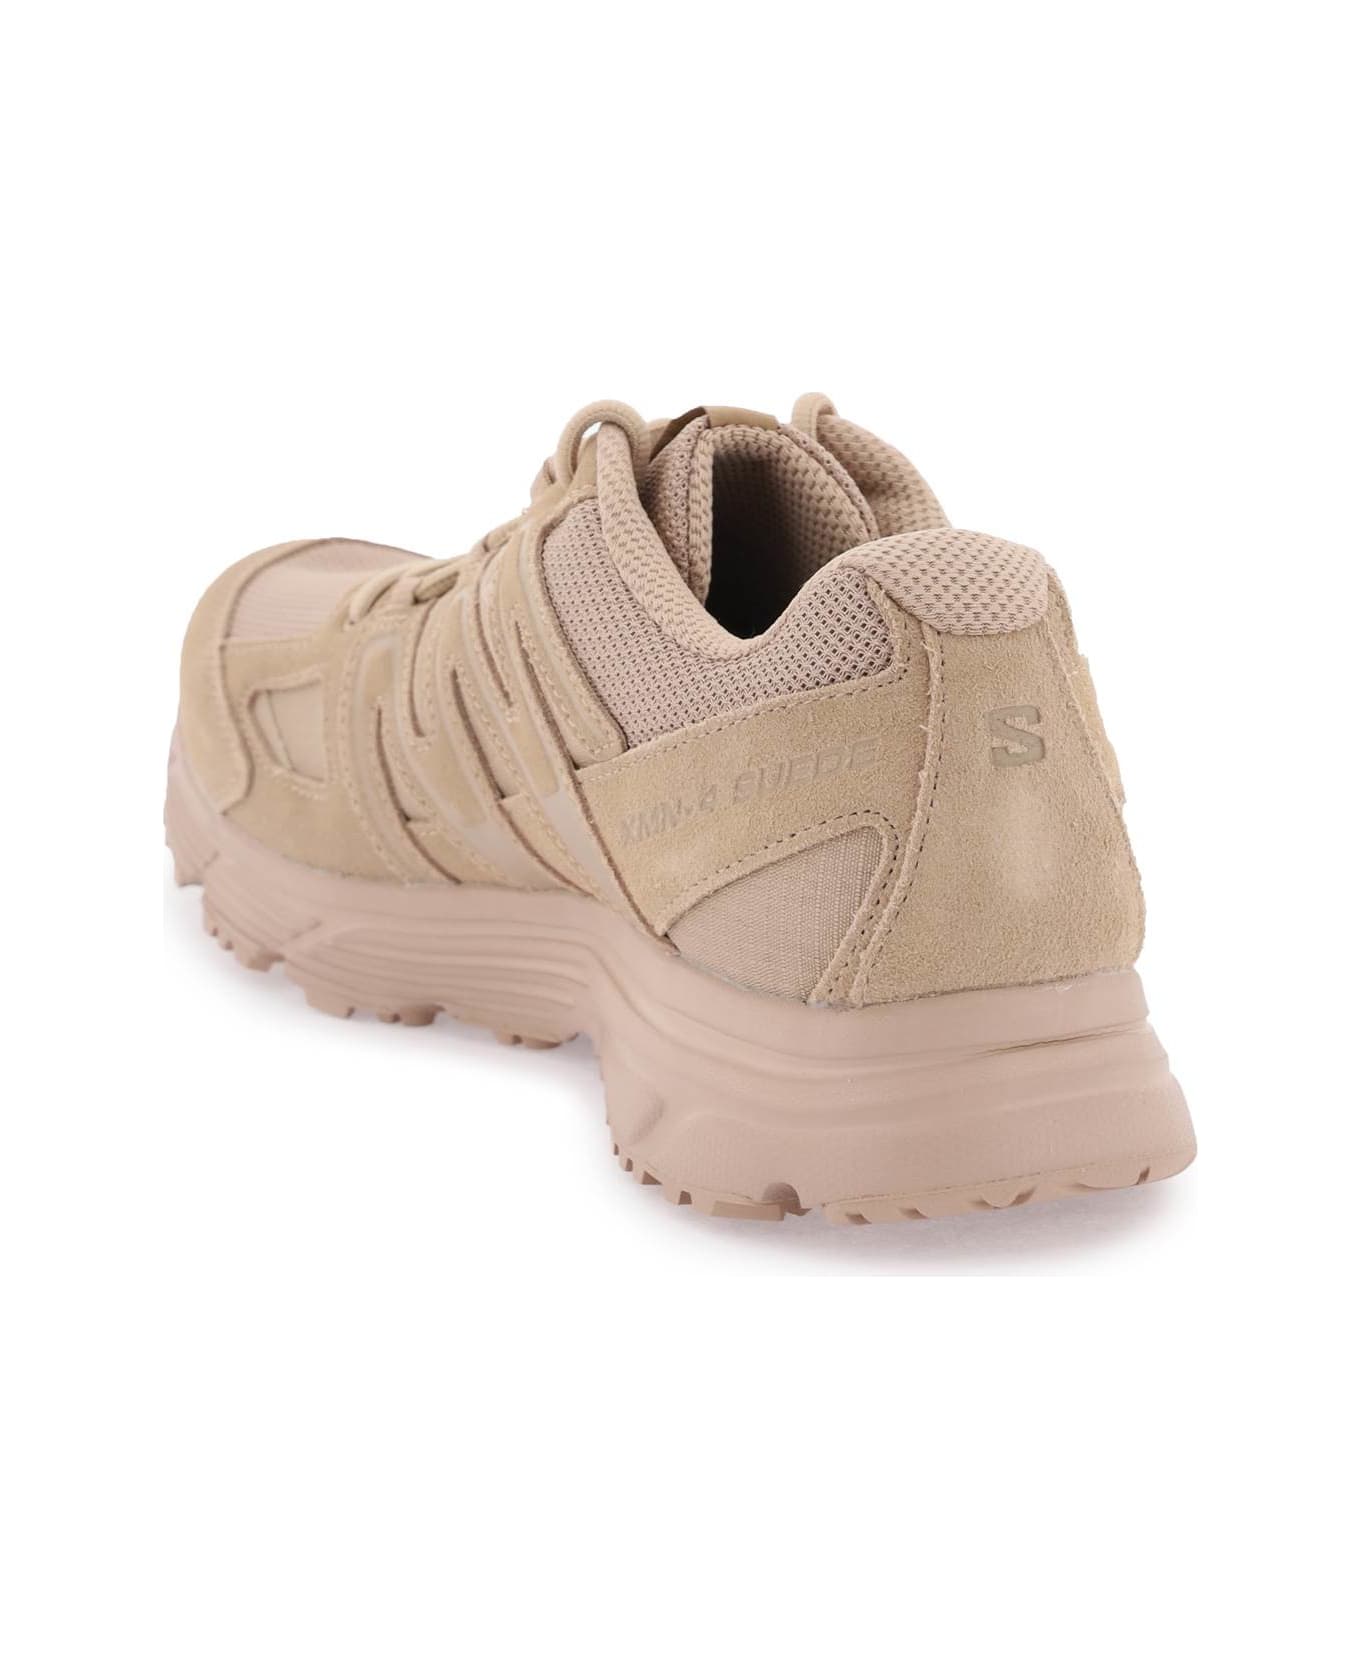 Salomon X-mission 4 Suede Sneakers - NATURAL NATURAL NATURAL (Pink)